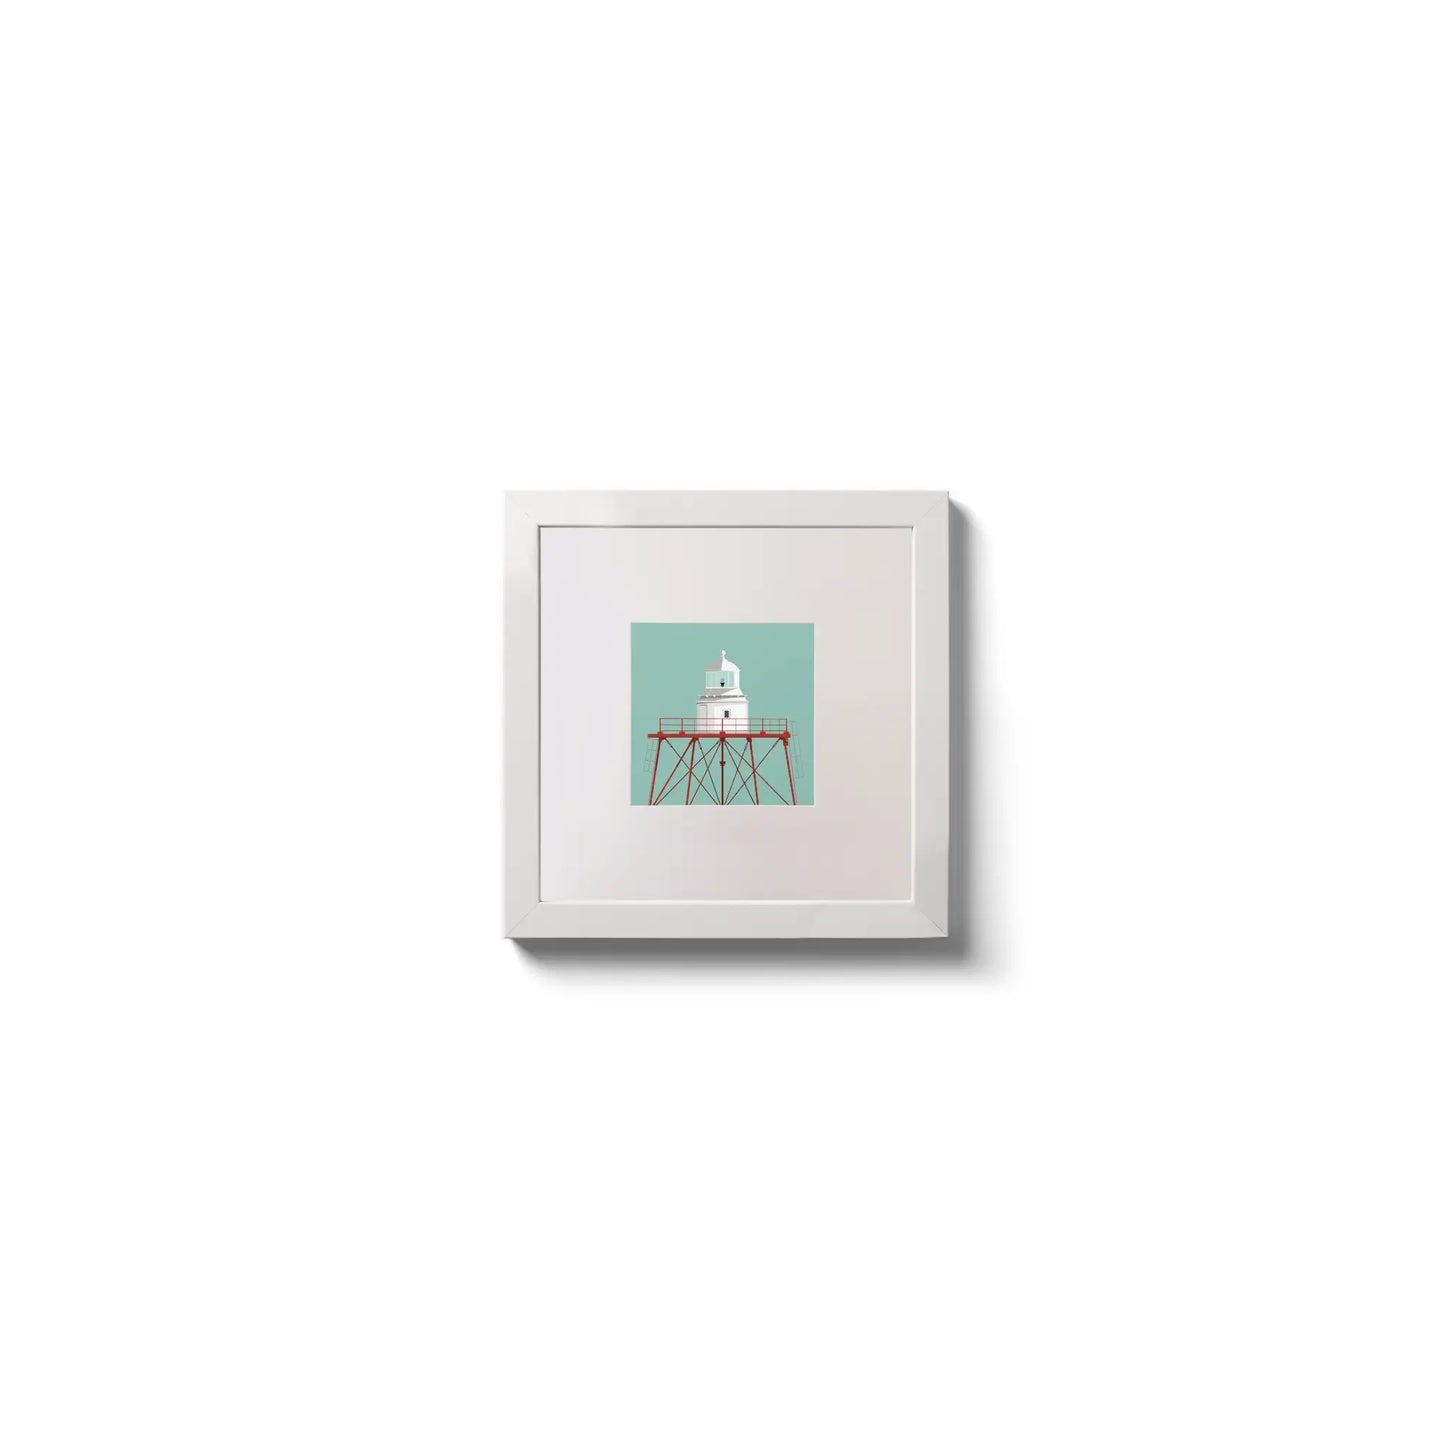 Illustration of Spitbank lighthouse on an ocean green background,  in a white square frame measuring 10x10cm.